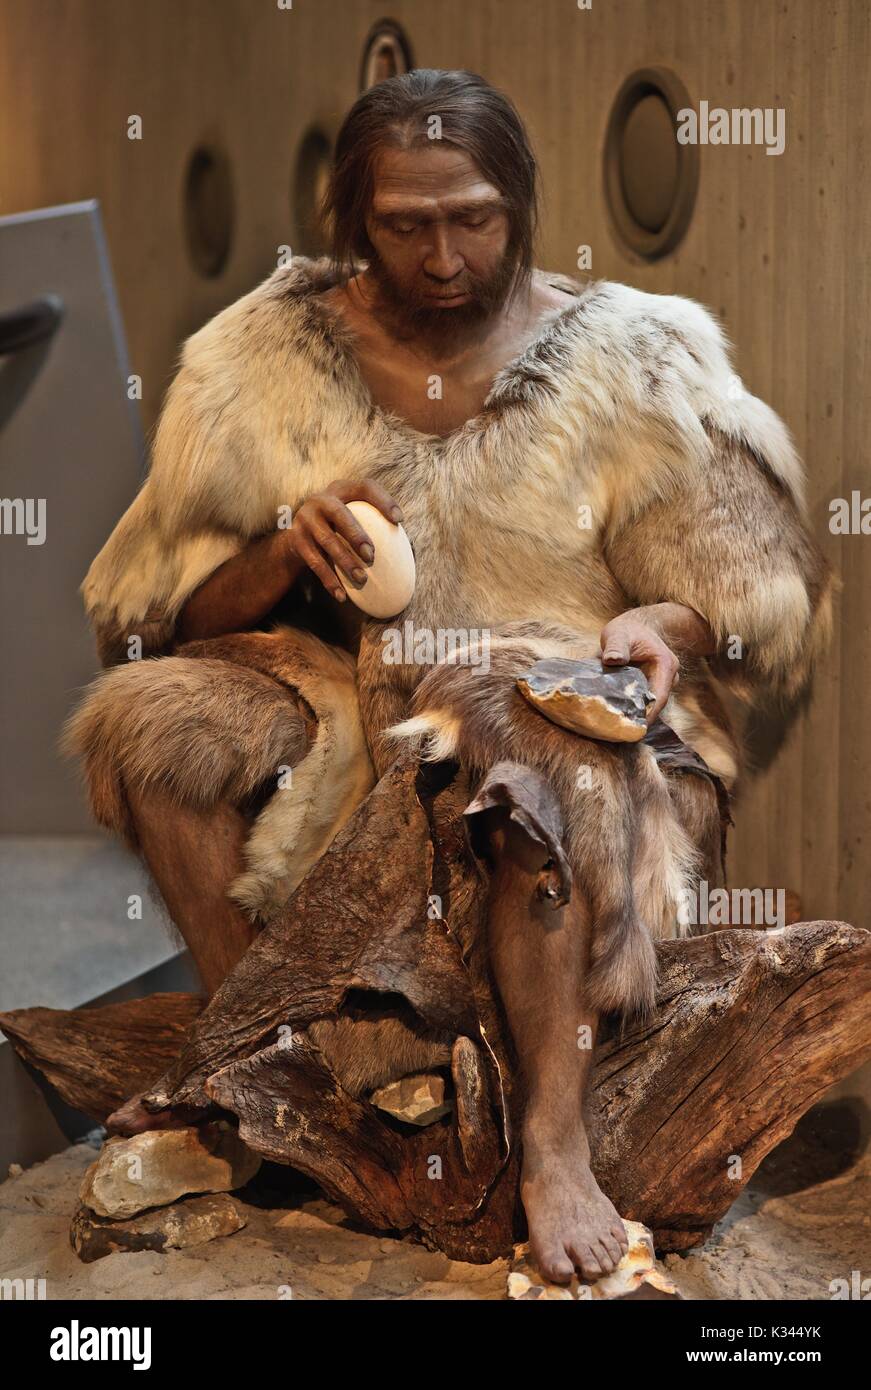 Neanderthal Man working with stones, chipping off arrow heads and knifes Stock Photo